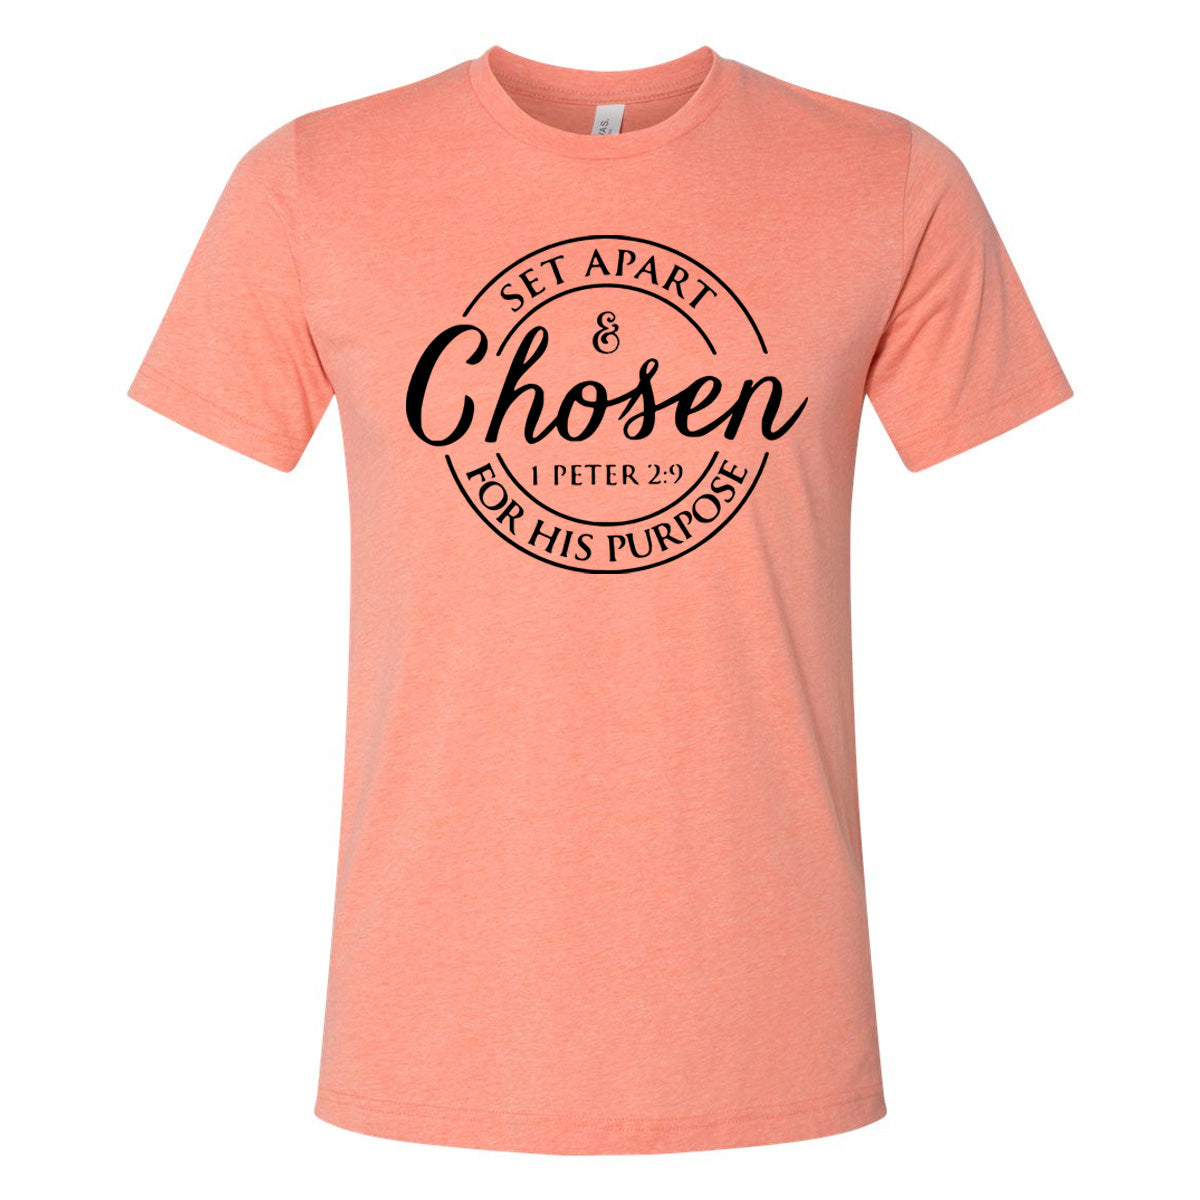 Set Apart & Chosen For His Purpose - Heather Sunset Short Sleeves Tee - Southern Grace Creations